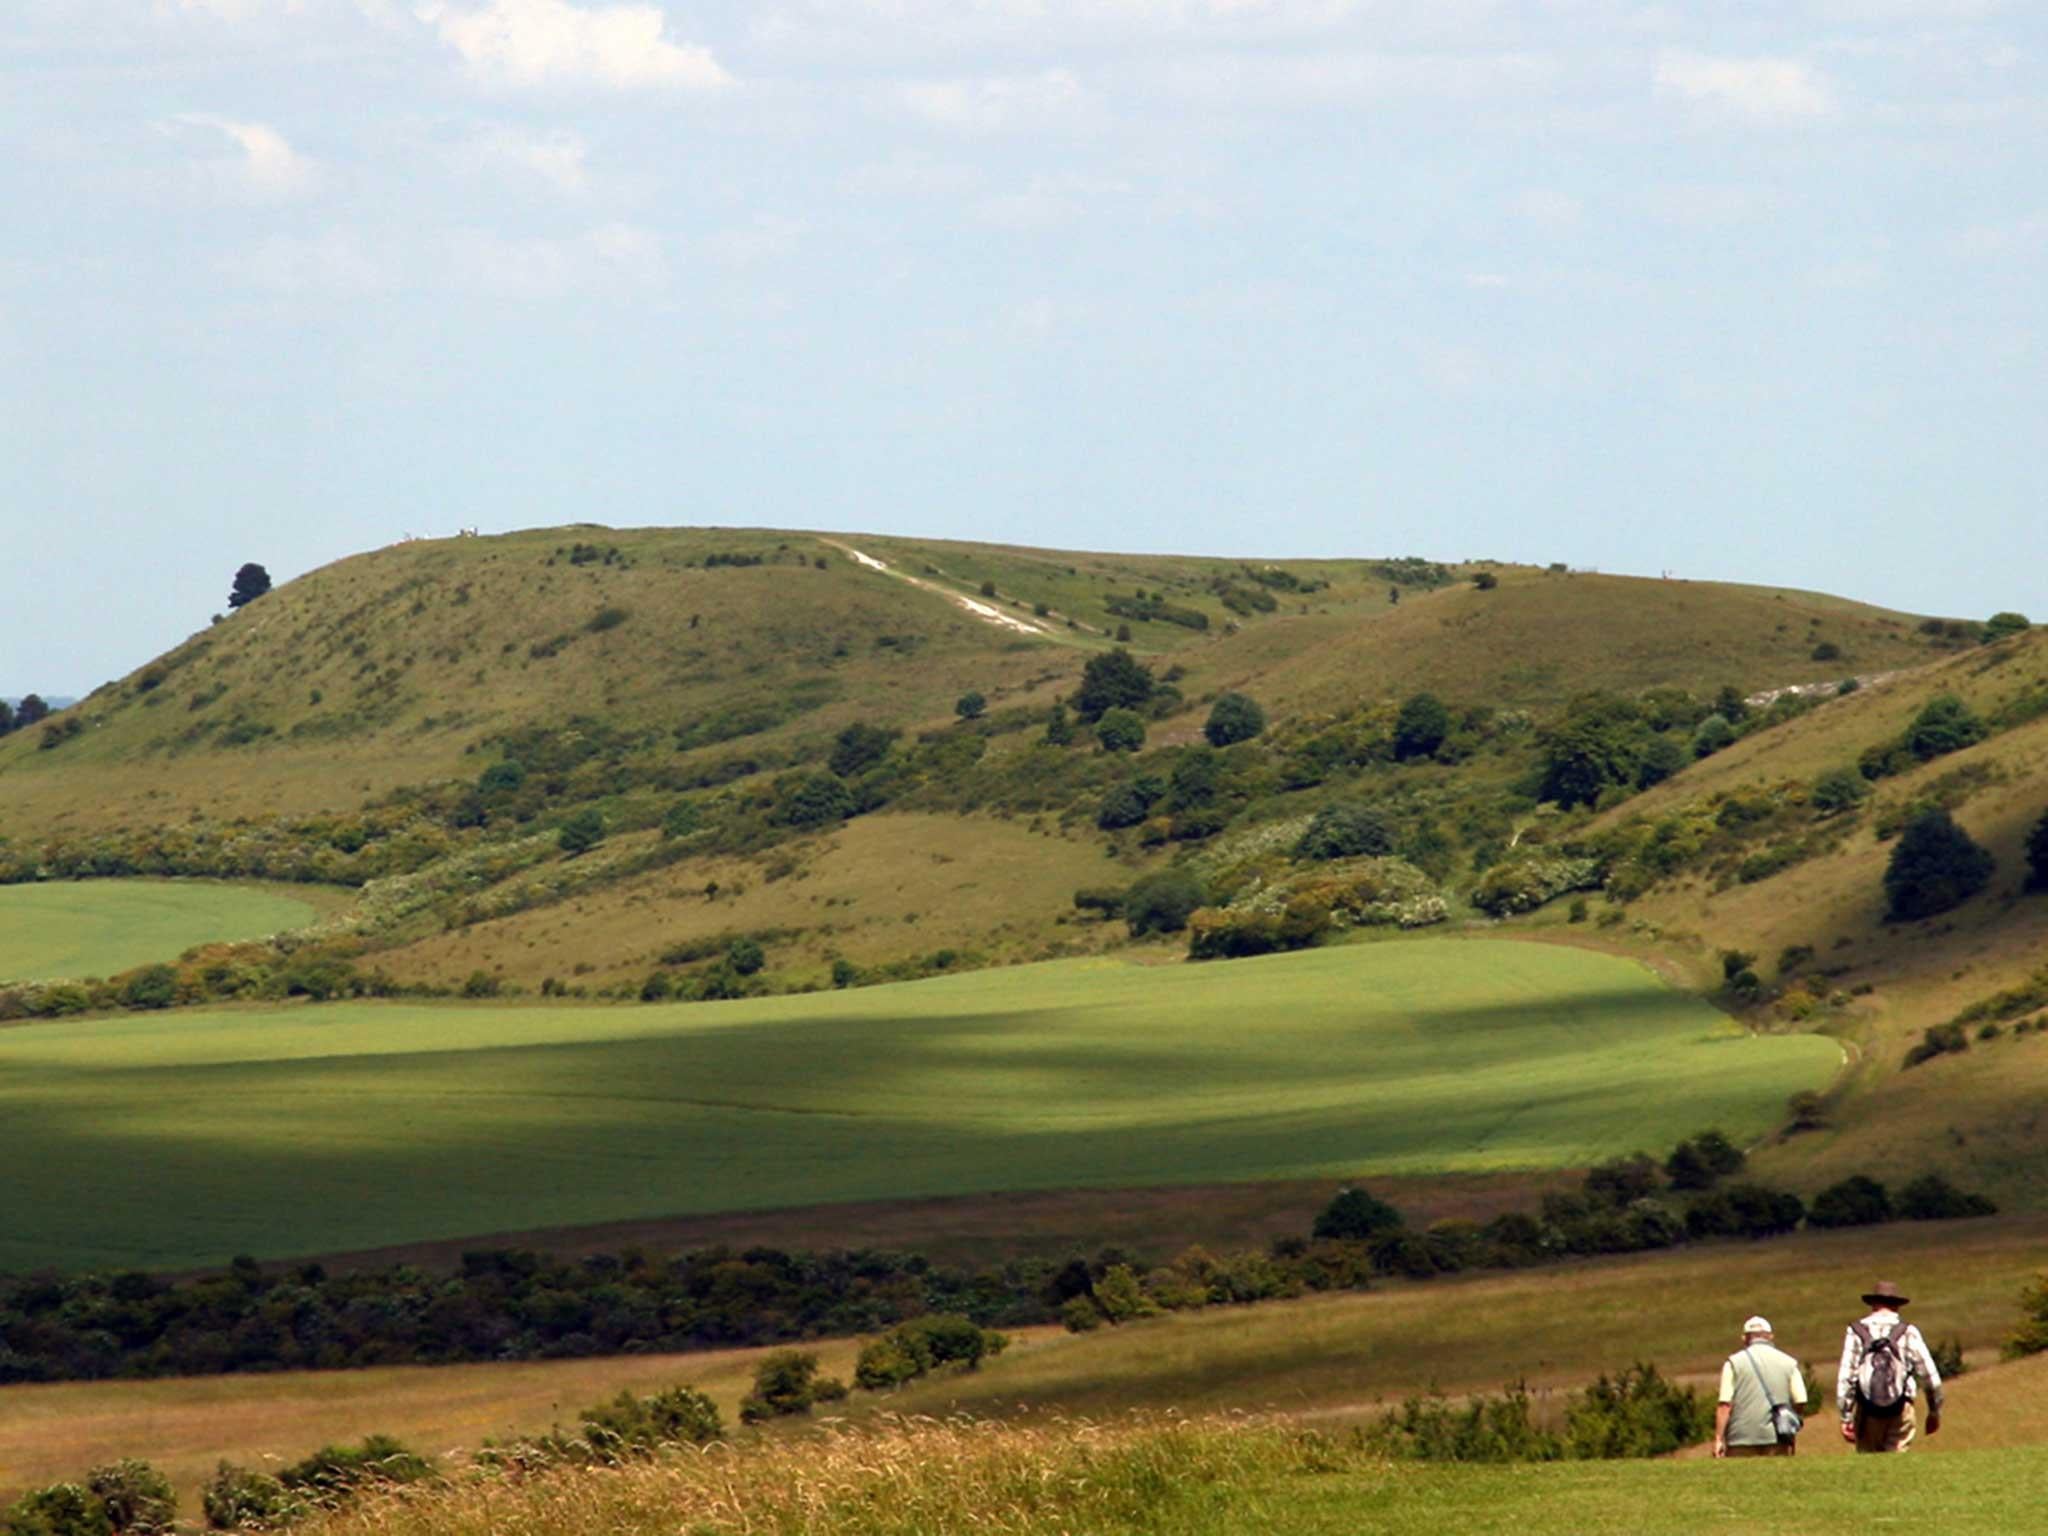 Ivinghoe Beacon, in the Chiltern Hills, seen looking north from The Ridgeway, said to be Britain's oldest road